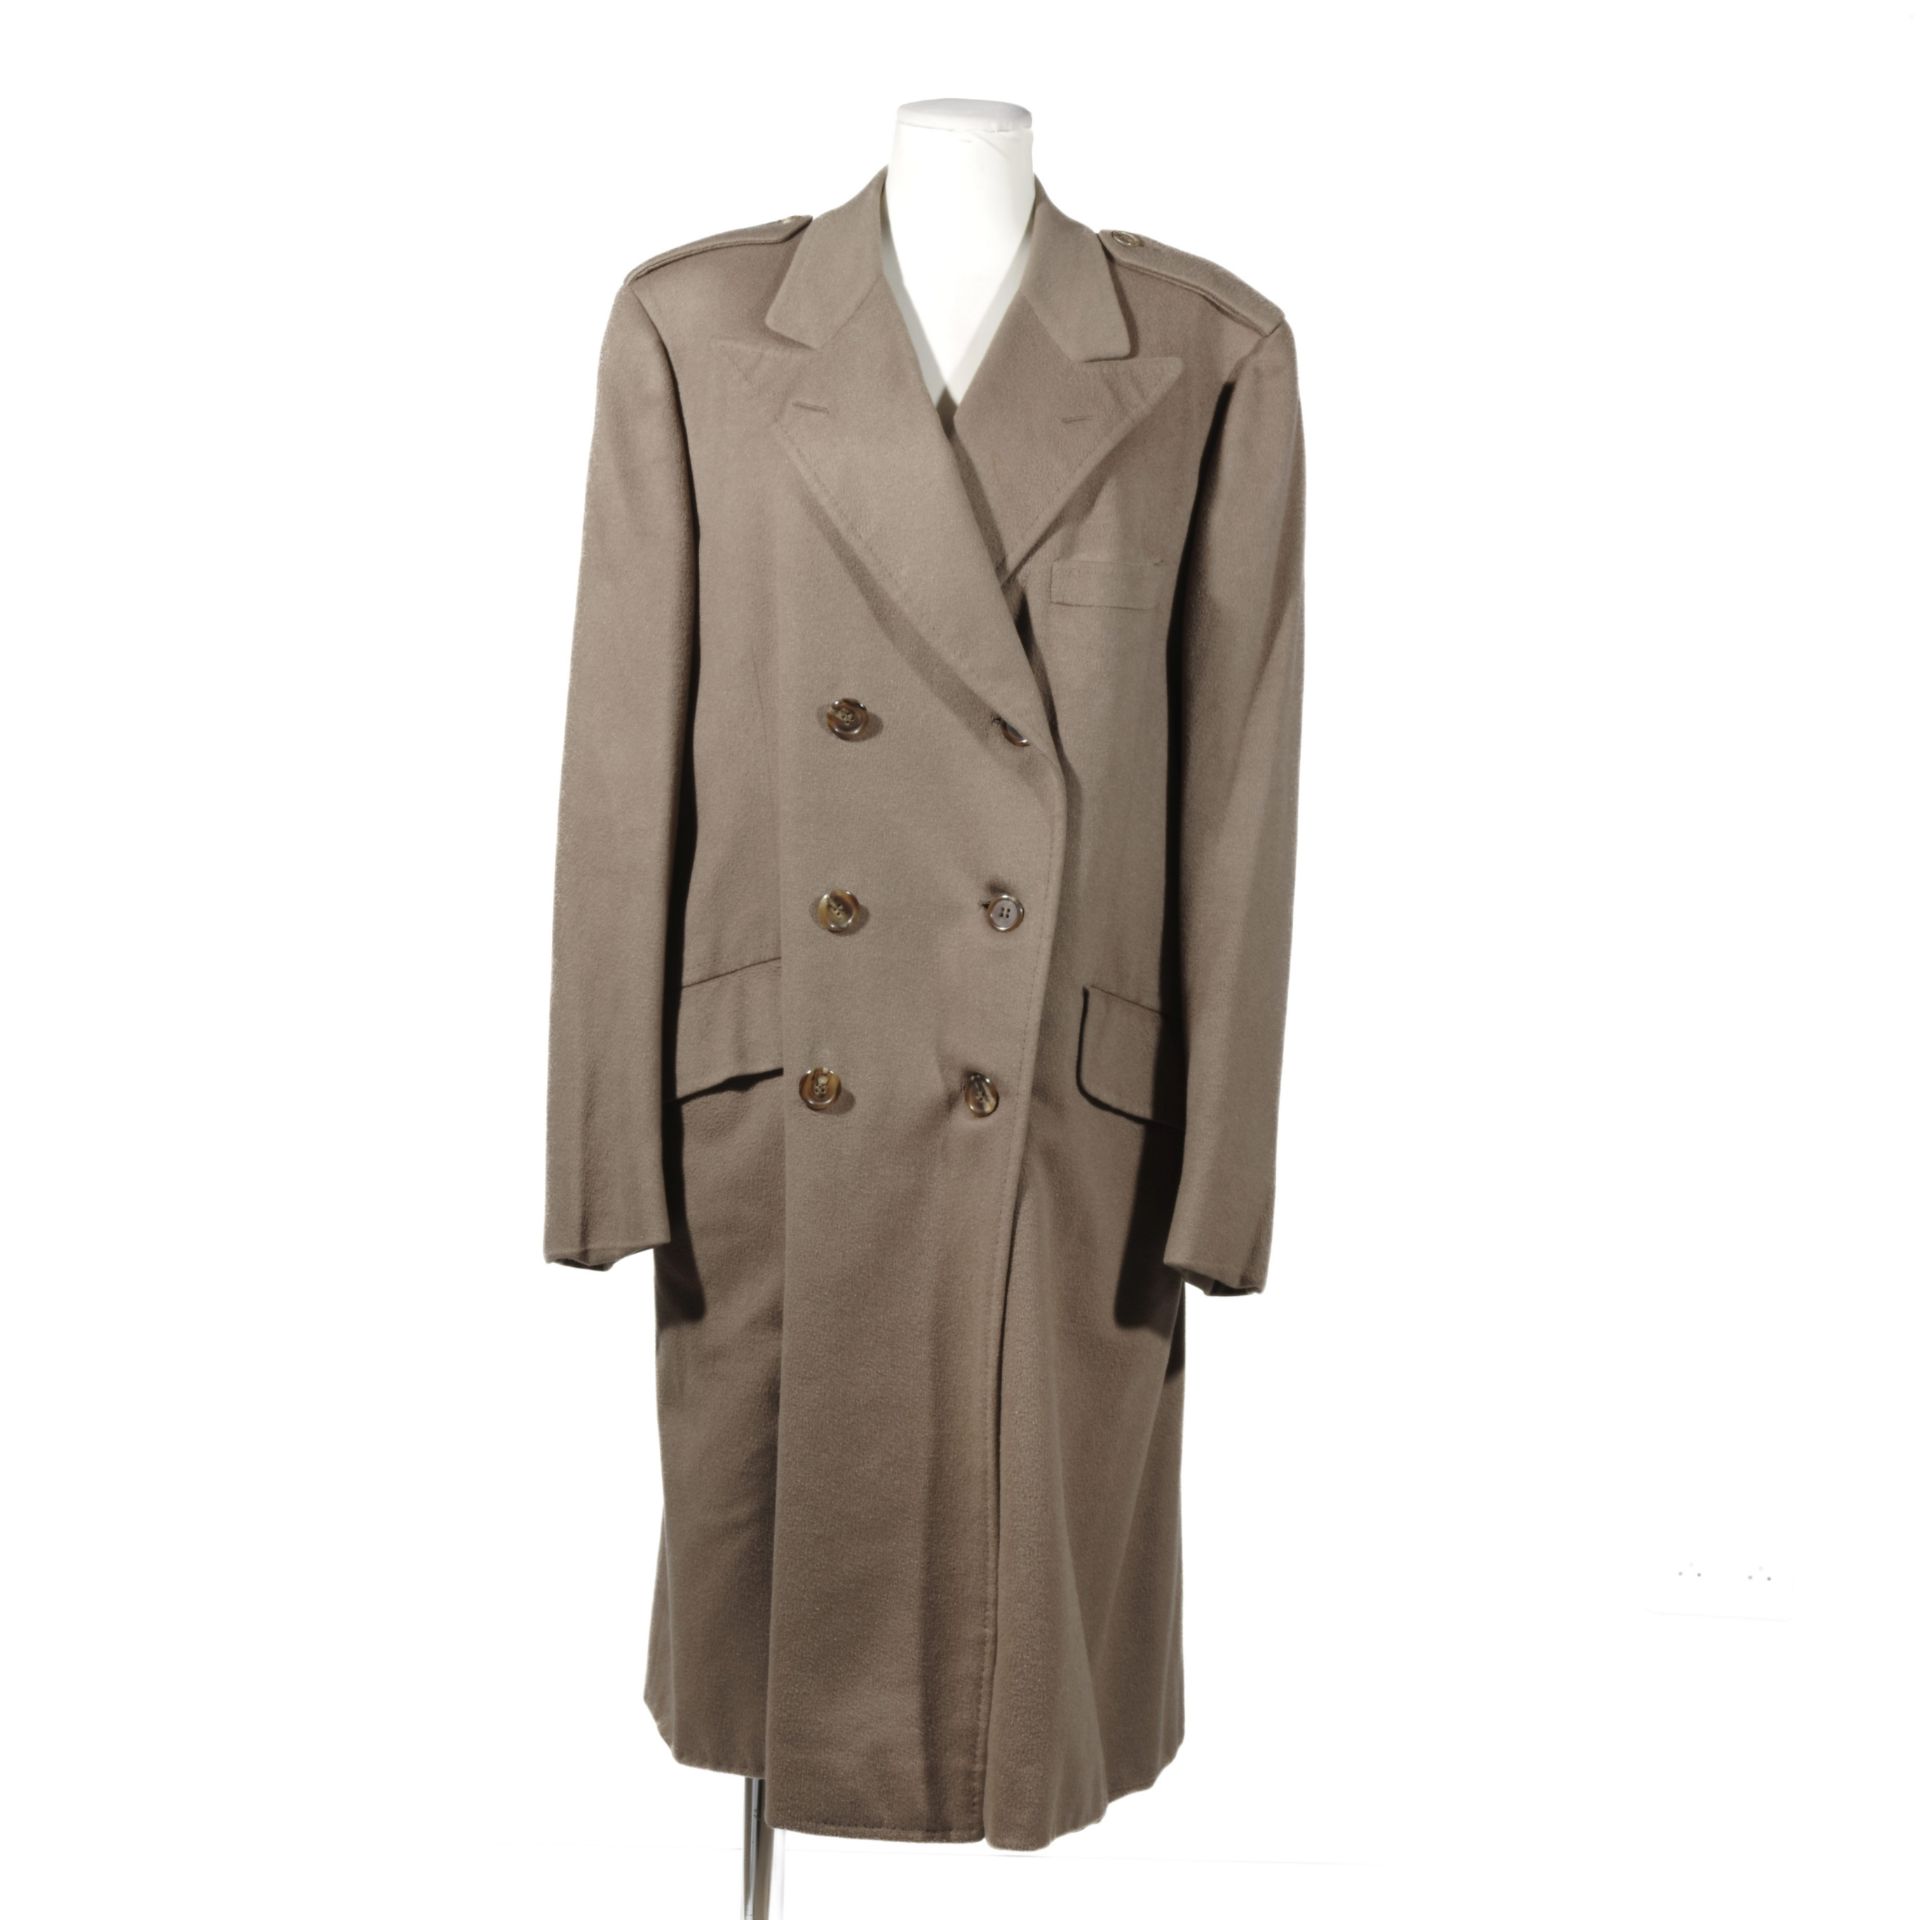 HERMES Paris Made In England. Manteau droit Homme, 100% cachemire taupe